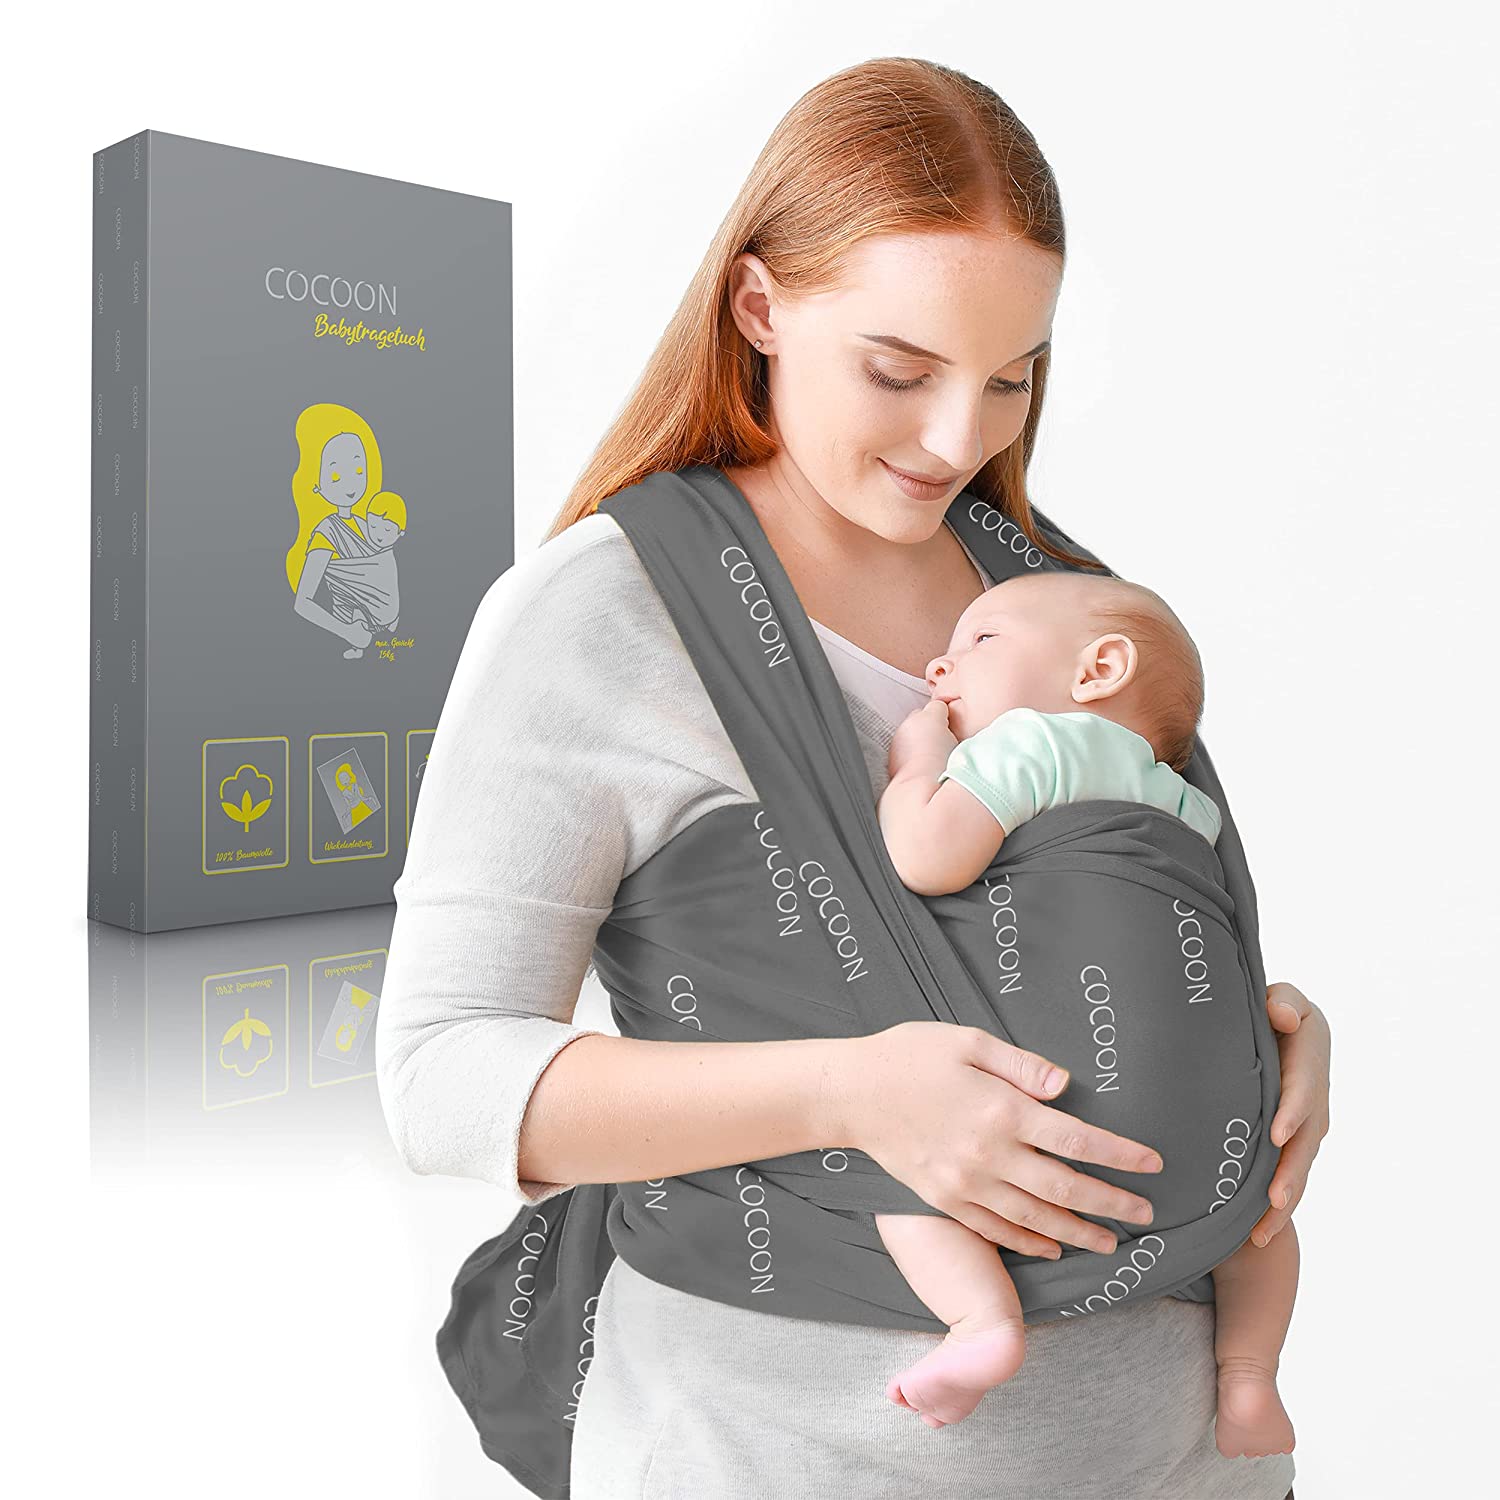 COCOON CLOTHES FOR MEN & WOMEN COCOON® Baby Sling - Baby Sling for Premature & Newborns - Up to 15 kg [0-18] Months - Baby Sling with Tie Instructions - Soft & Breathable Cotton - One Size